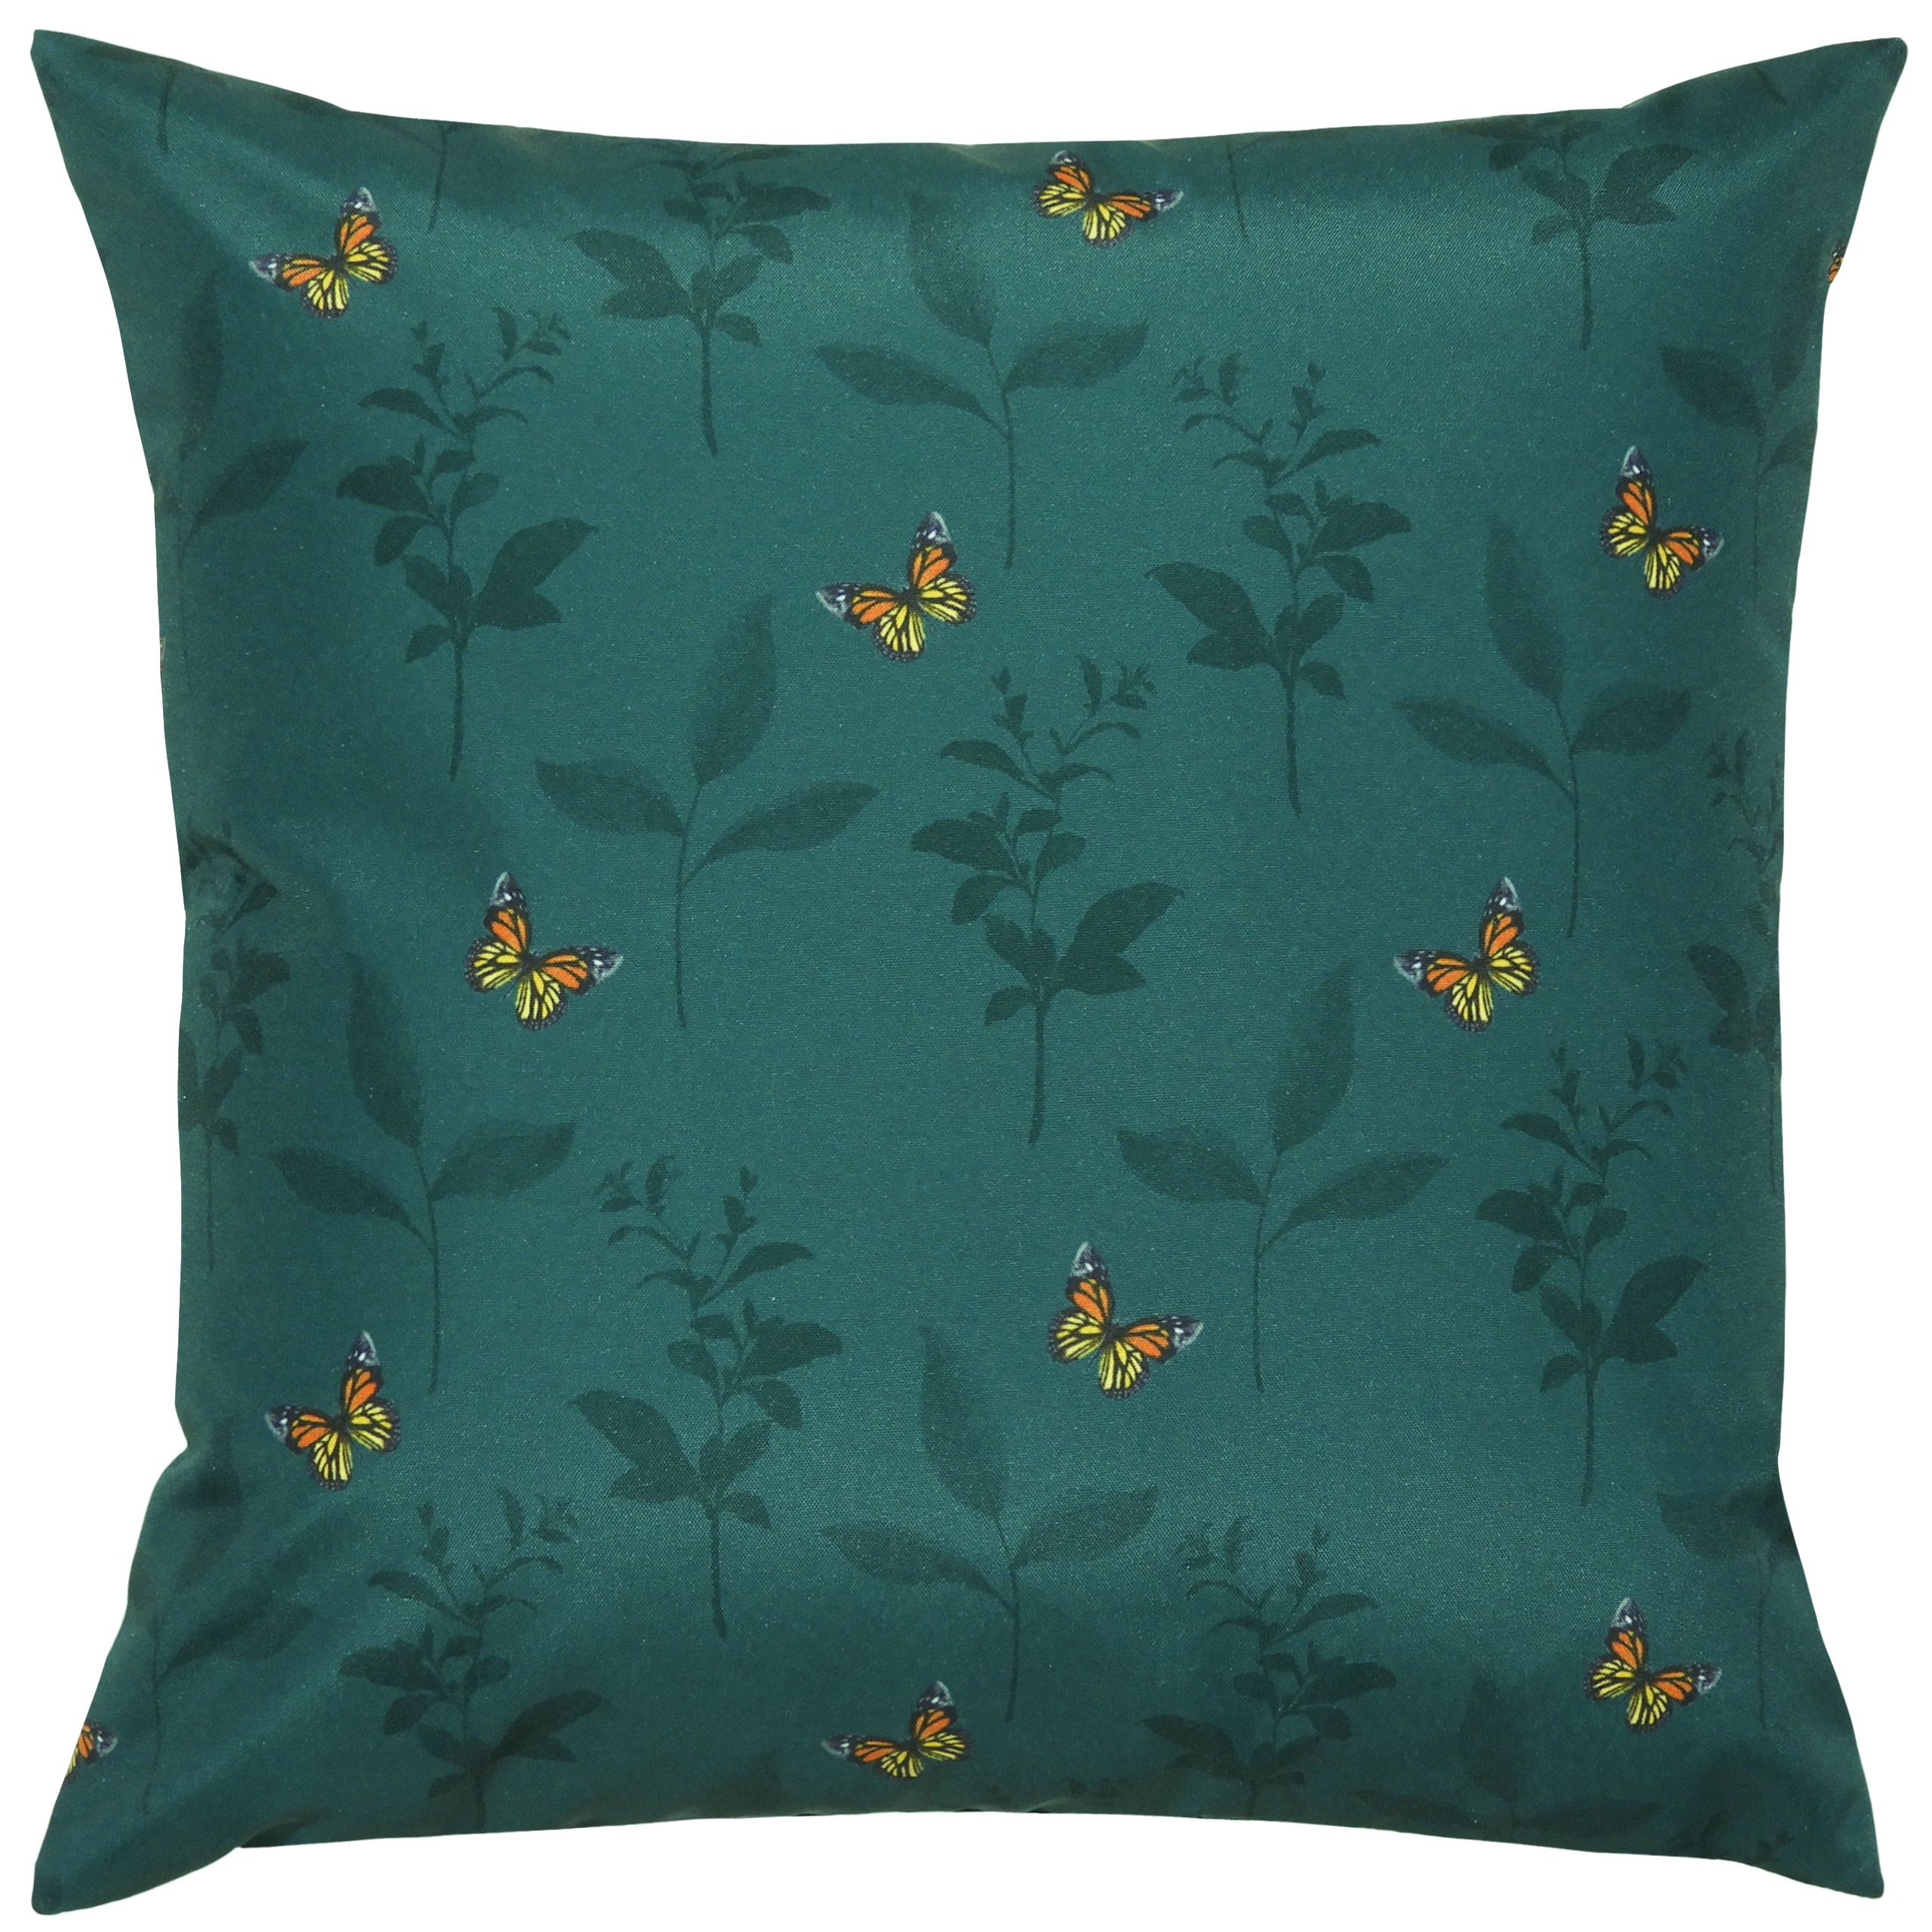 Add a pop of colour to your garden with this vibrant botanical cushion. Featuring a bold reversible design, this cushion will make a beautiful and durable addition to your outdoor space.